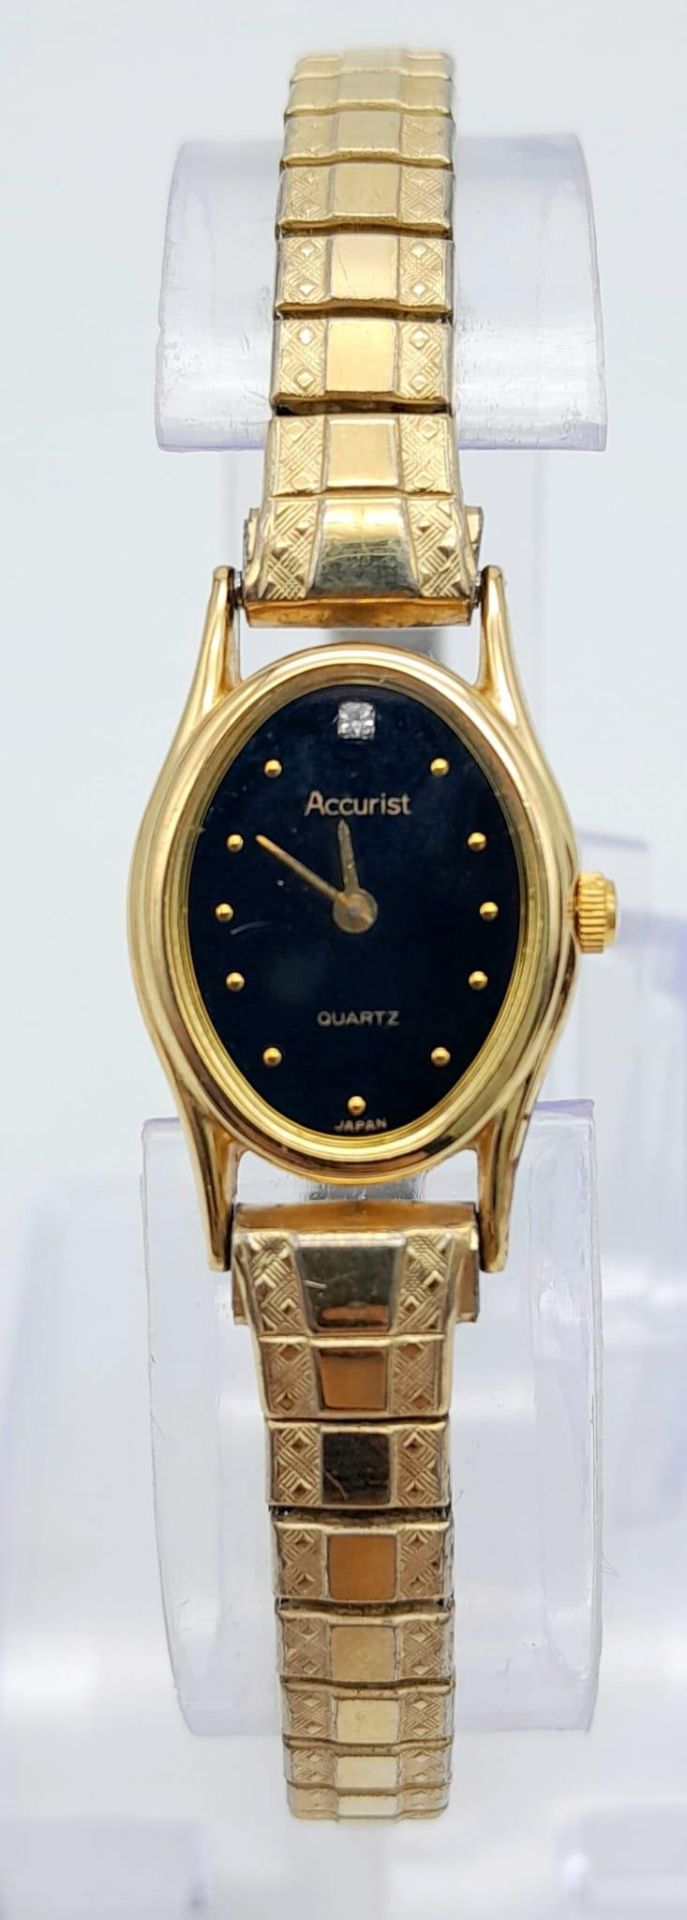 A Vintage Accurist Quartz Ladies Gold Tone Watch. Stainless steel strap and case - 10mm. Black dial.